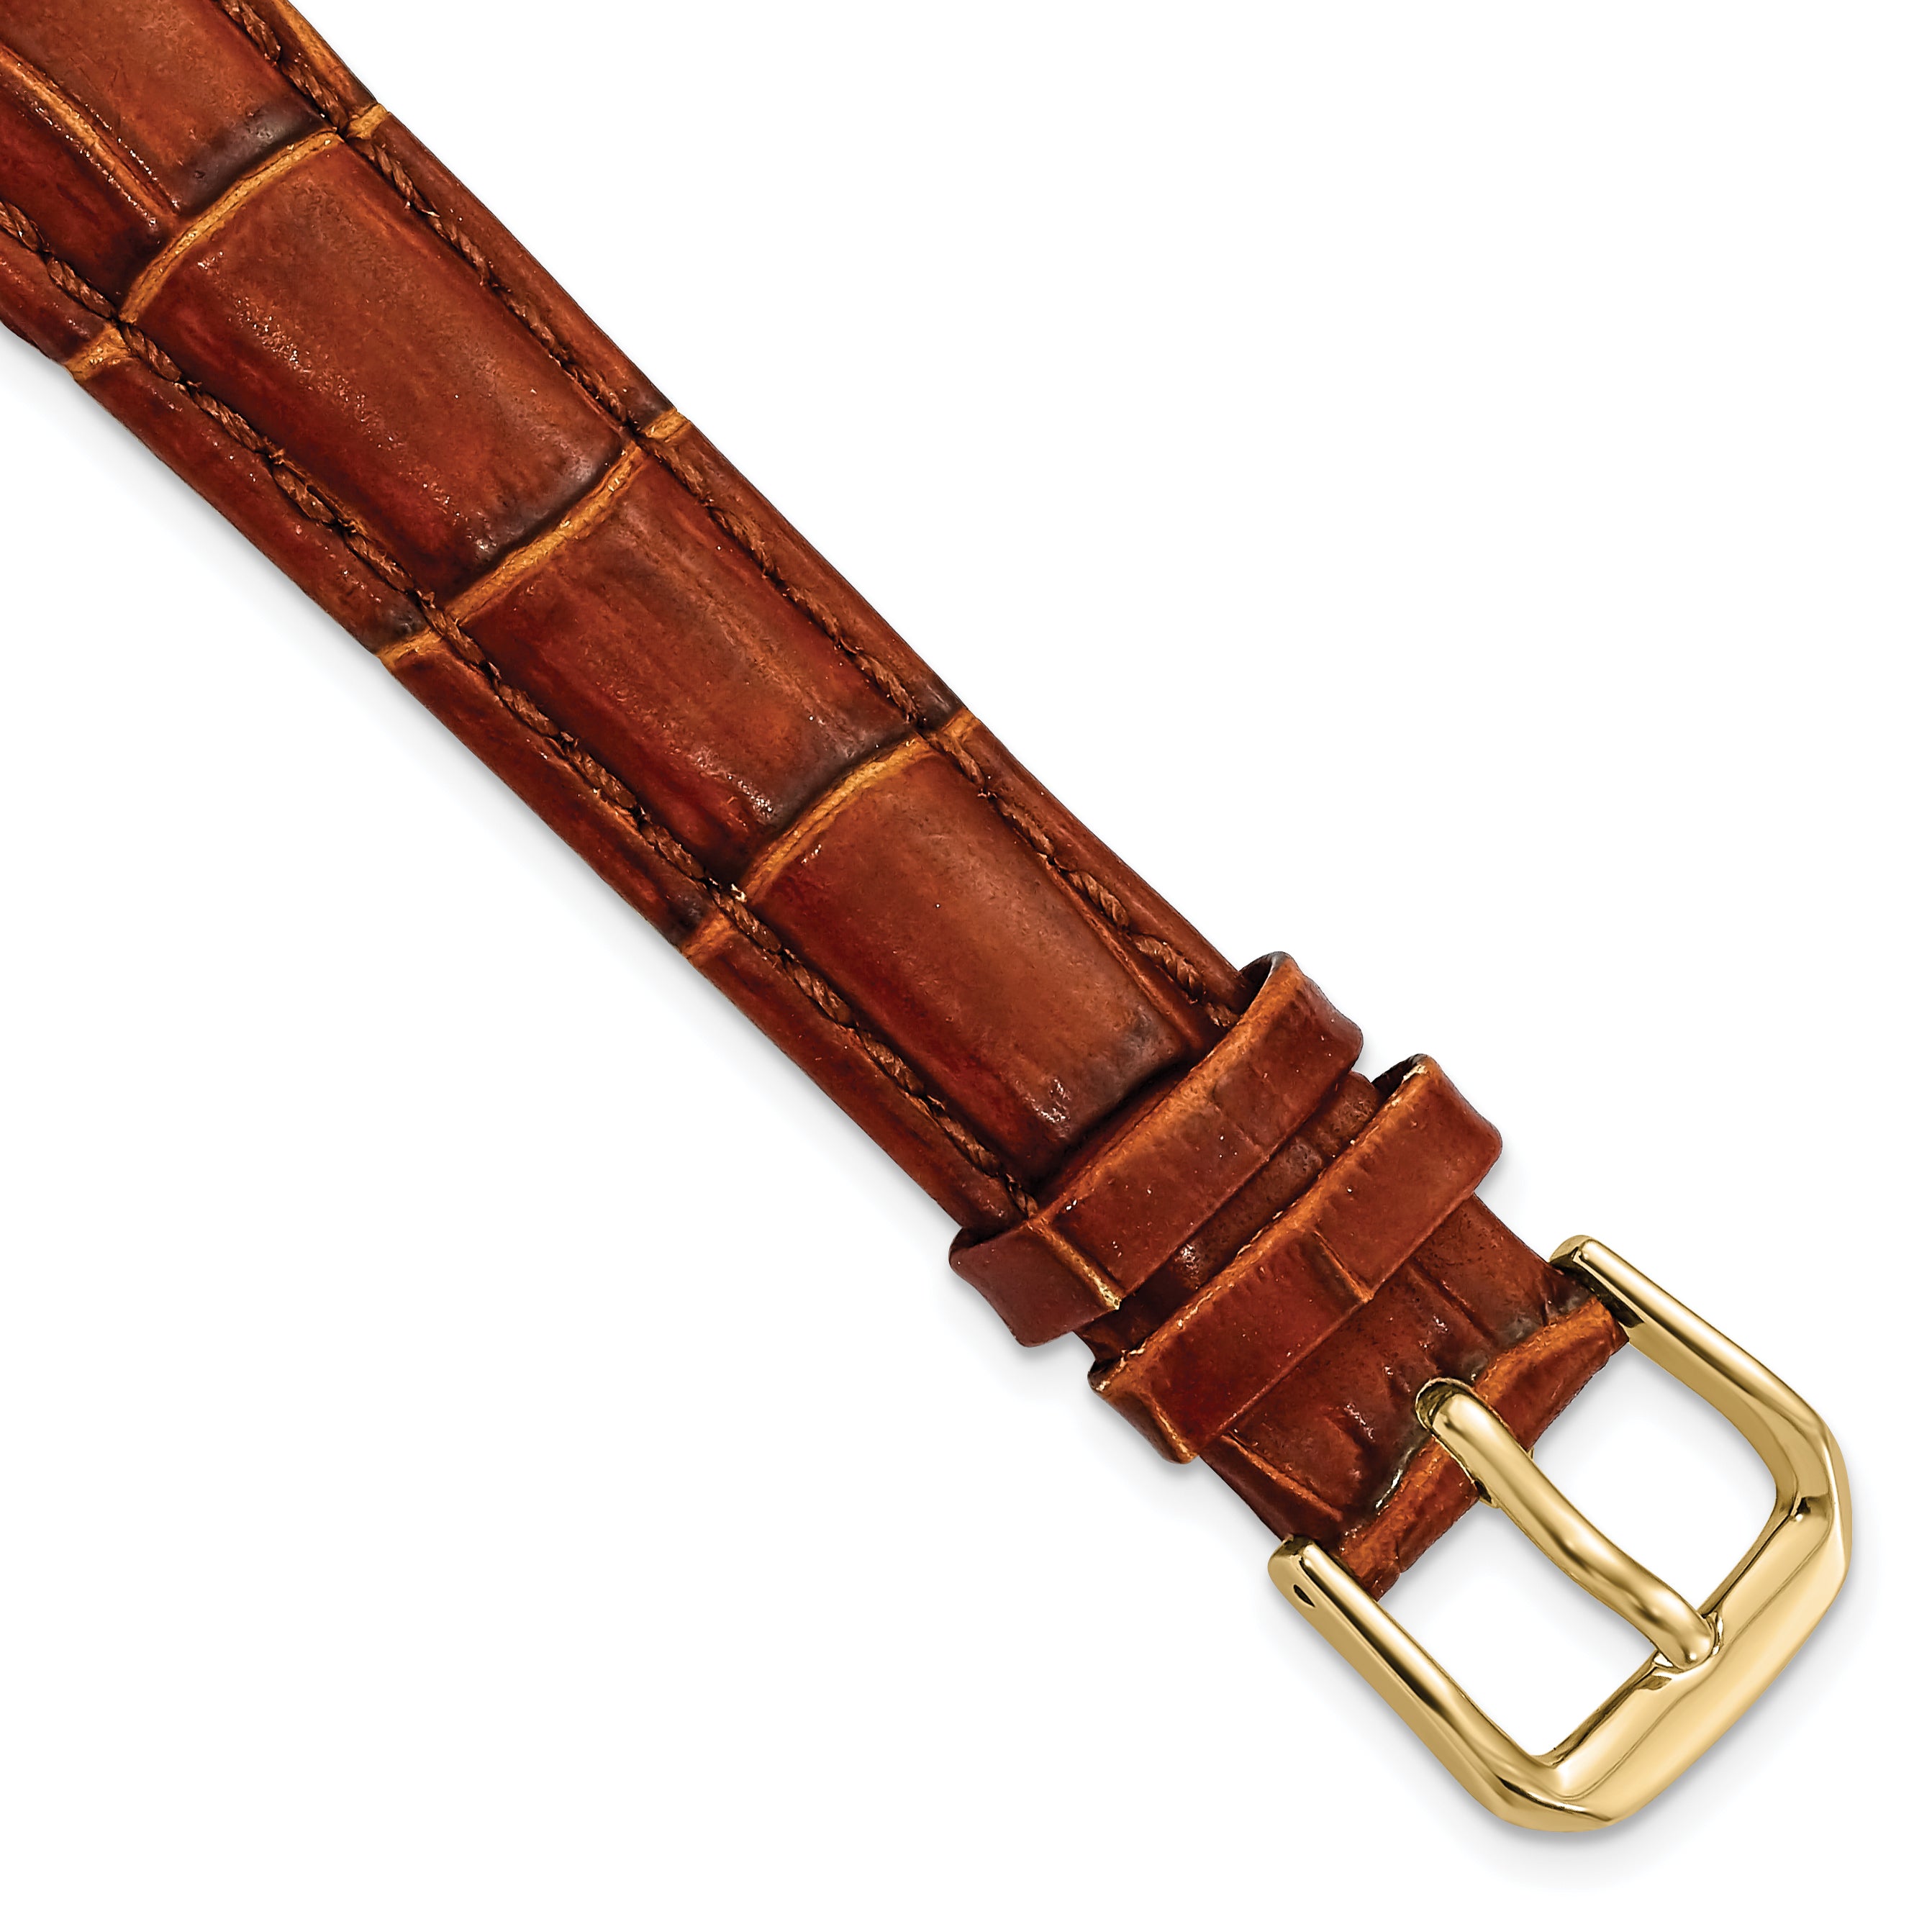 DeBeer 14mm Havana Crocodile Grain Leather with Dark Stitching and Gold-tone Buckle 6.75 inch Watch Band